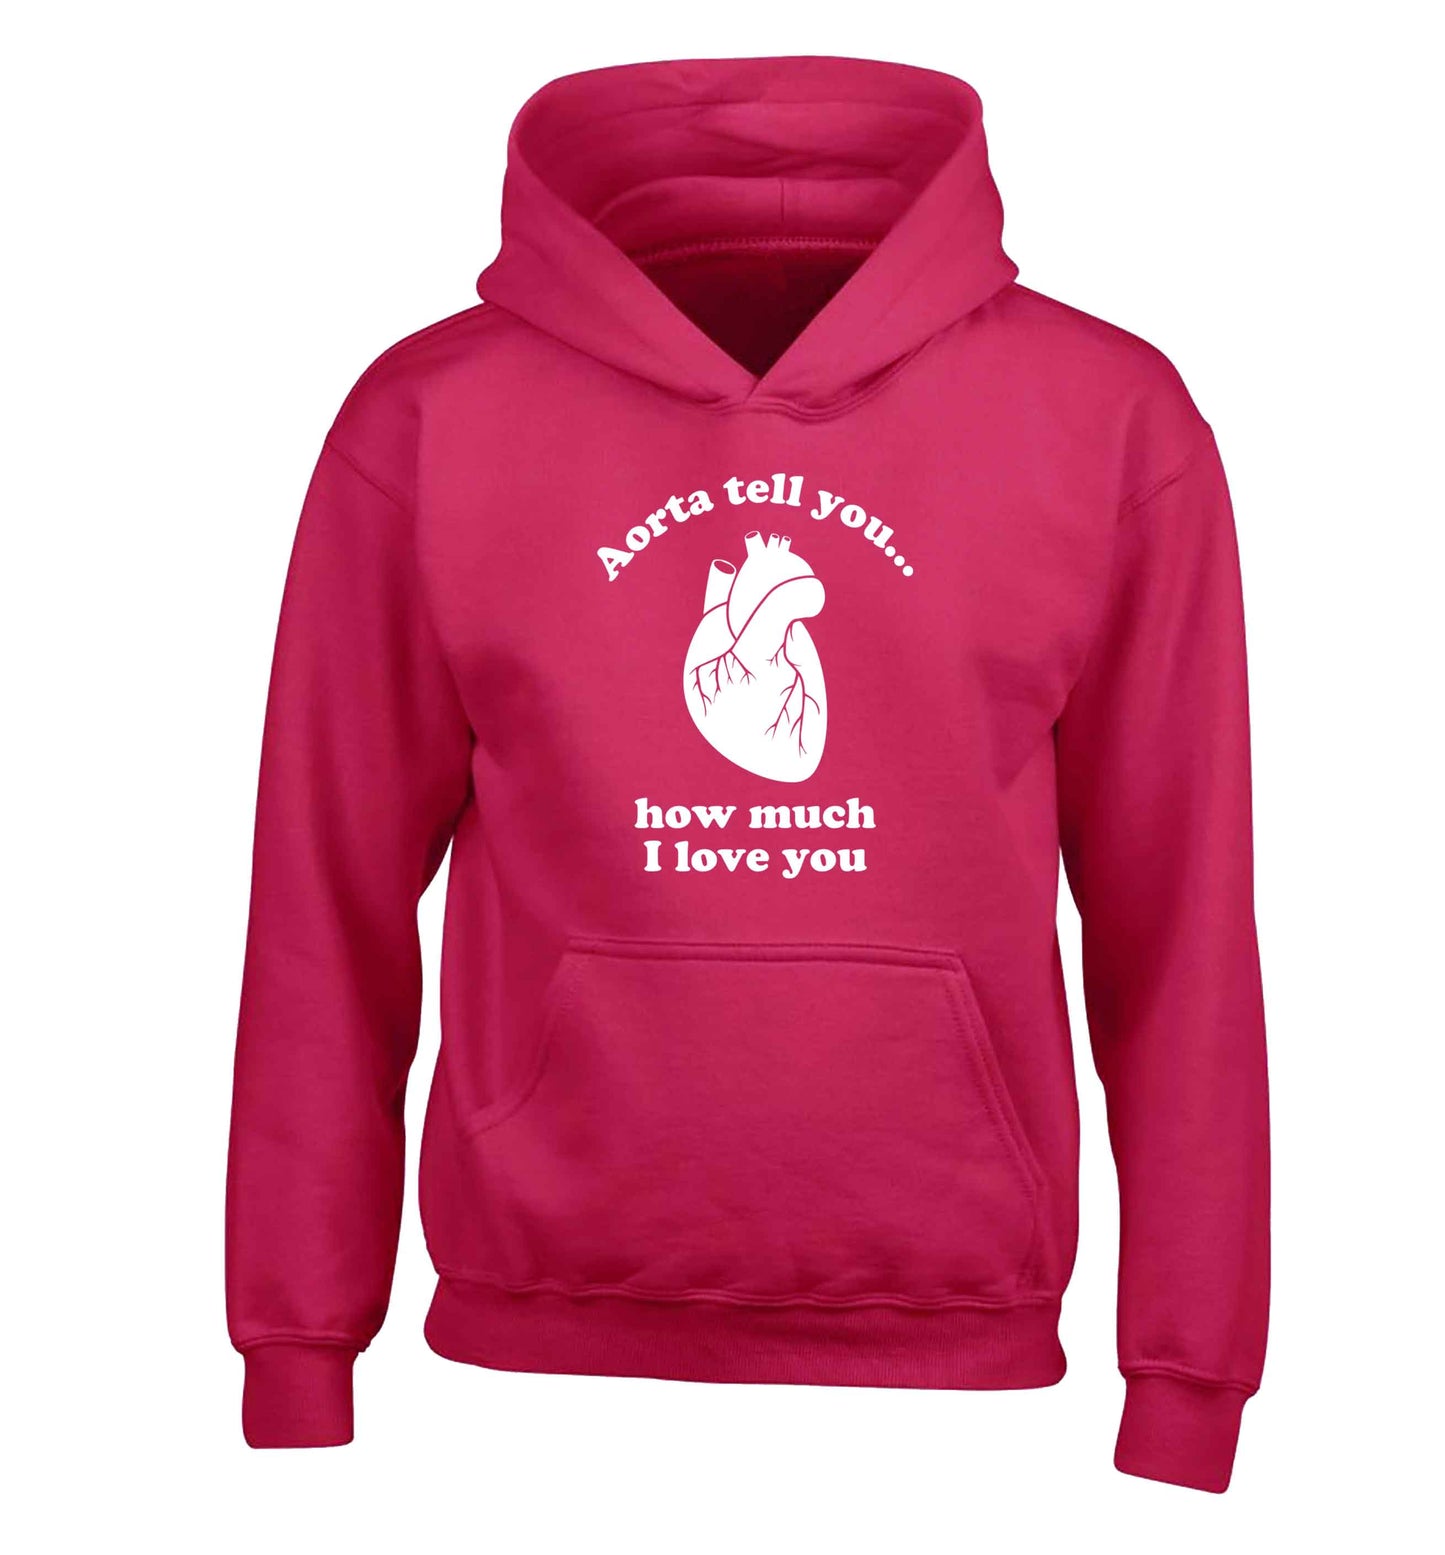 Aorta tell you how much I love you children's pink hoodie 12-13 Years